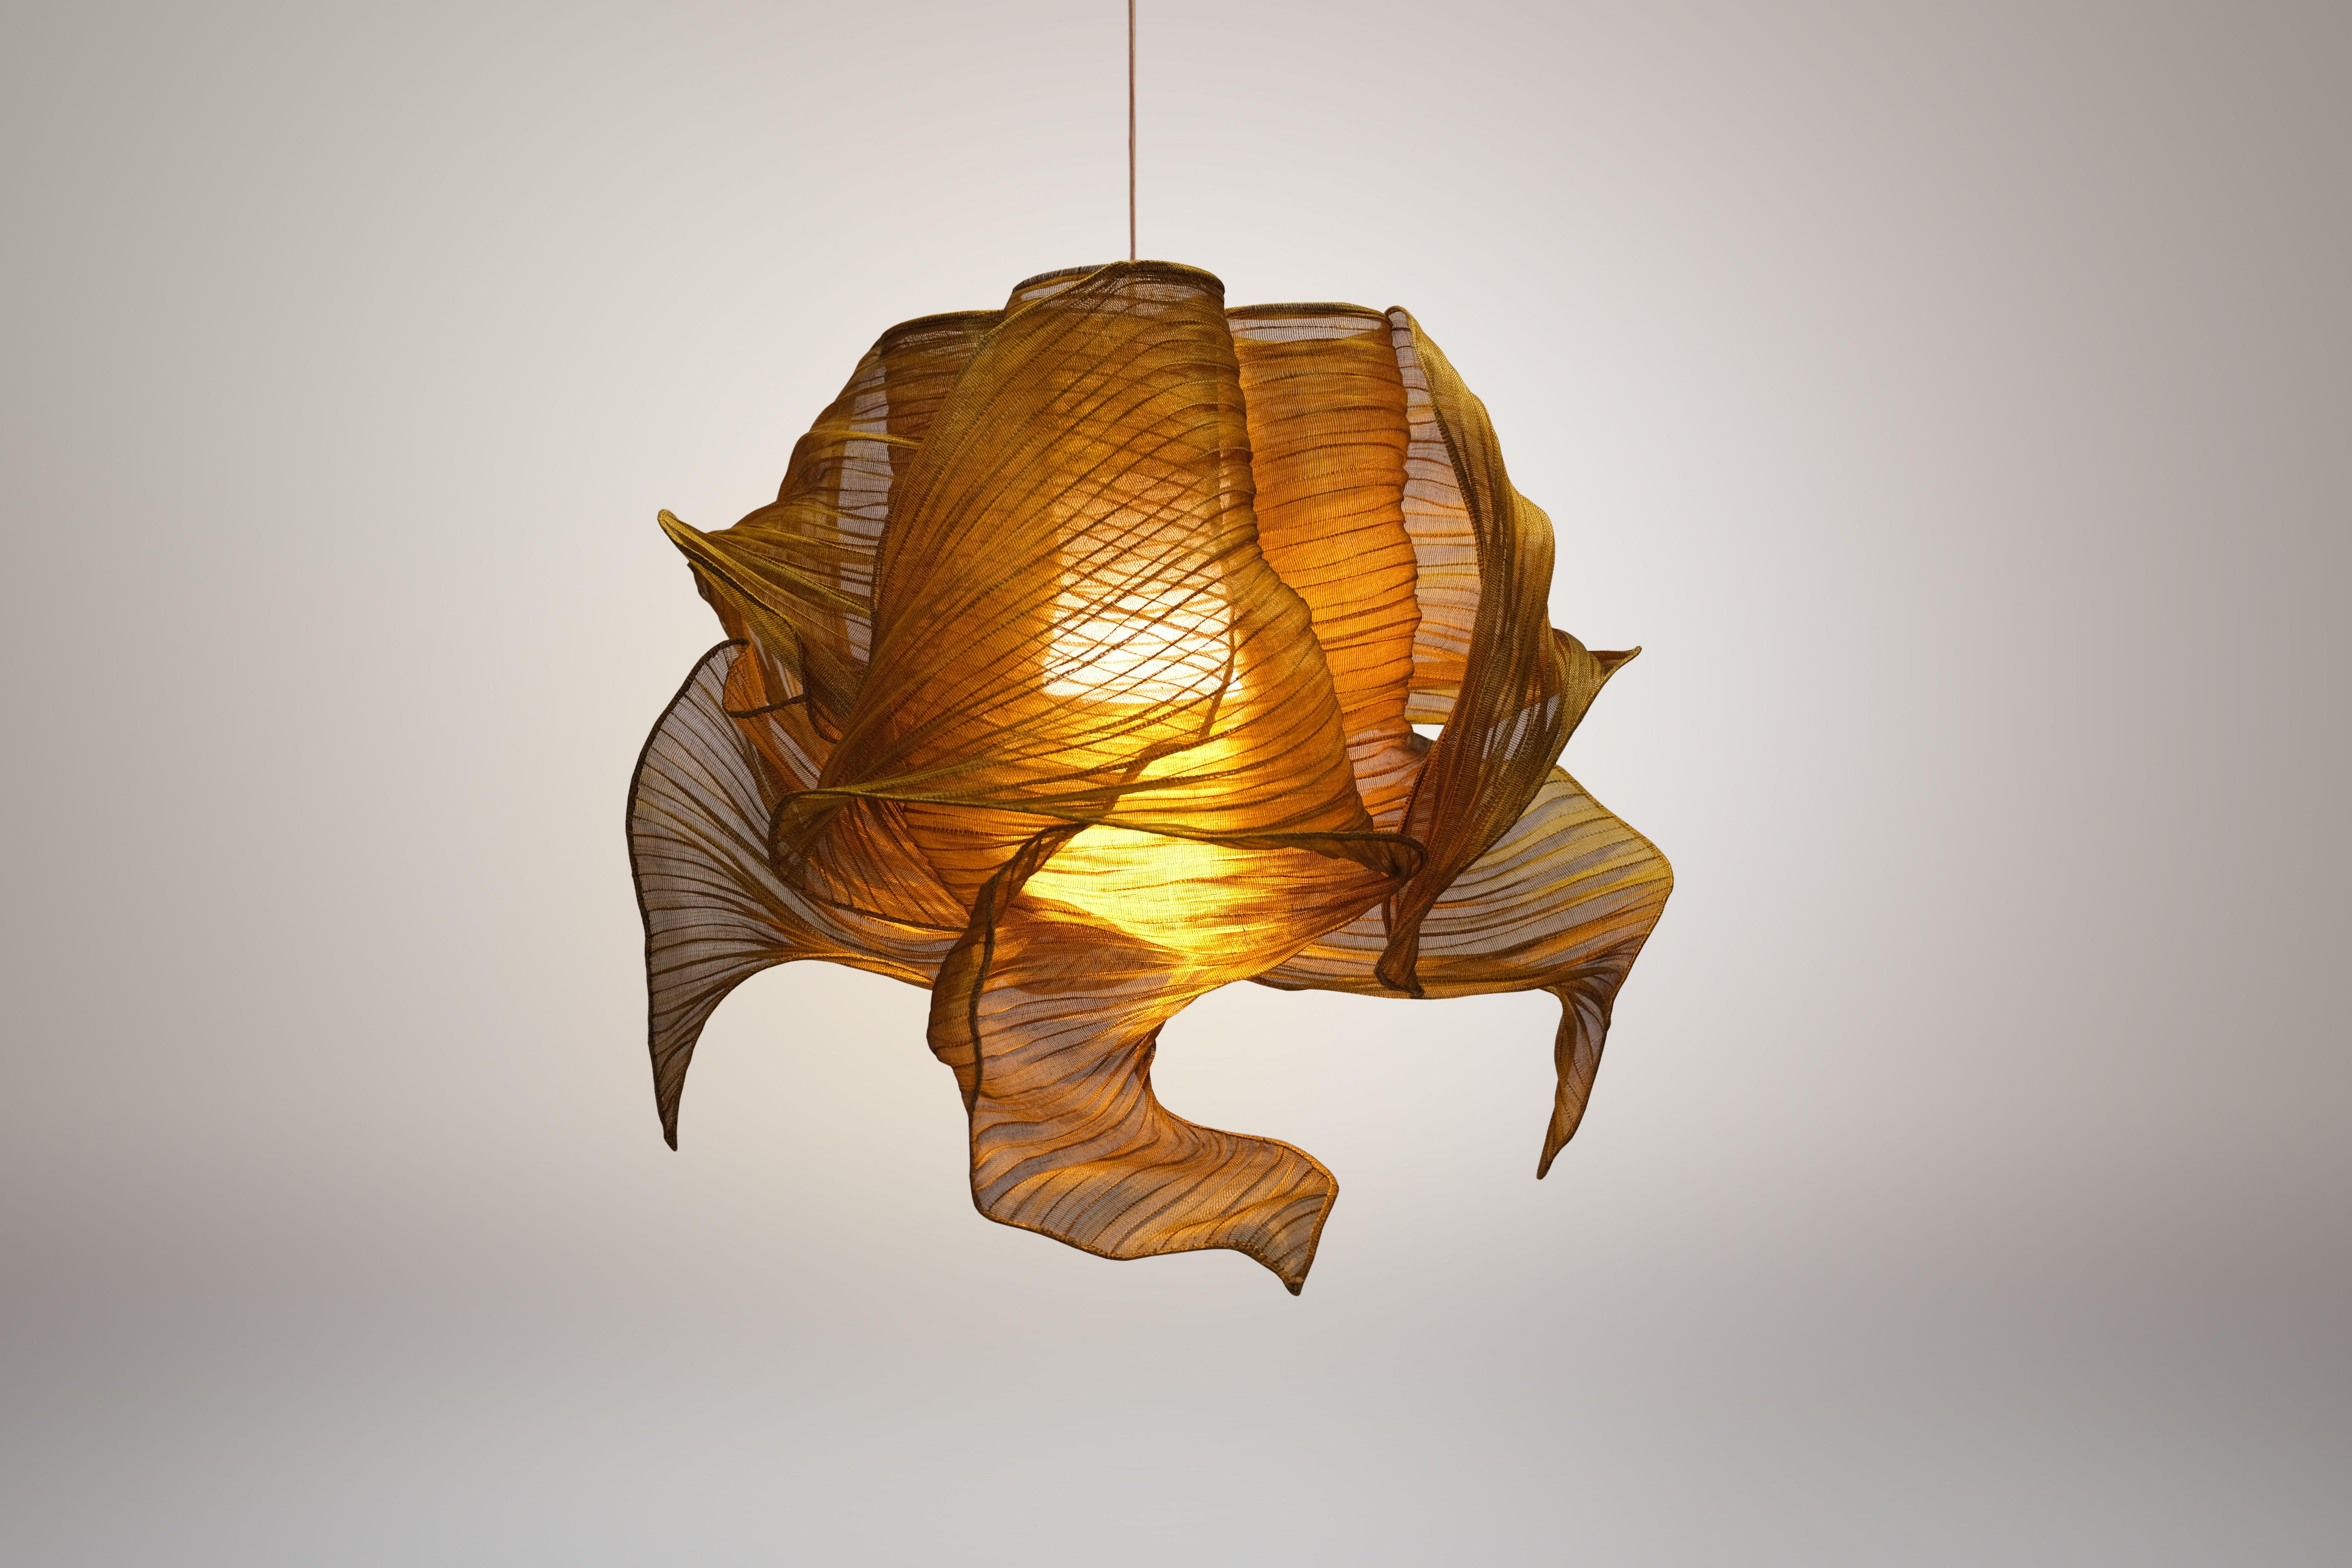 Honey Nebula pendant lamp by Mirei Monticelli.
Dimensions: D 60 x W 60 x H 60 cm.
Materials: Banaca fabric.
Also available in hand-painted fabric.

Providing soft light in an organic and unique design, the Nebula Lamp draws its inspiration from